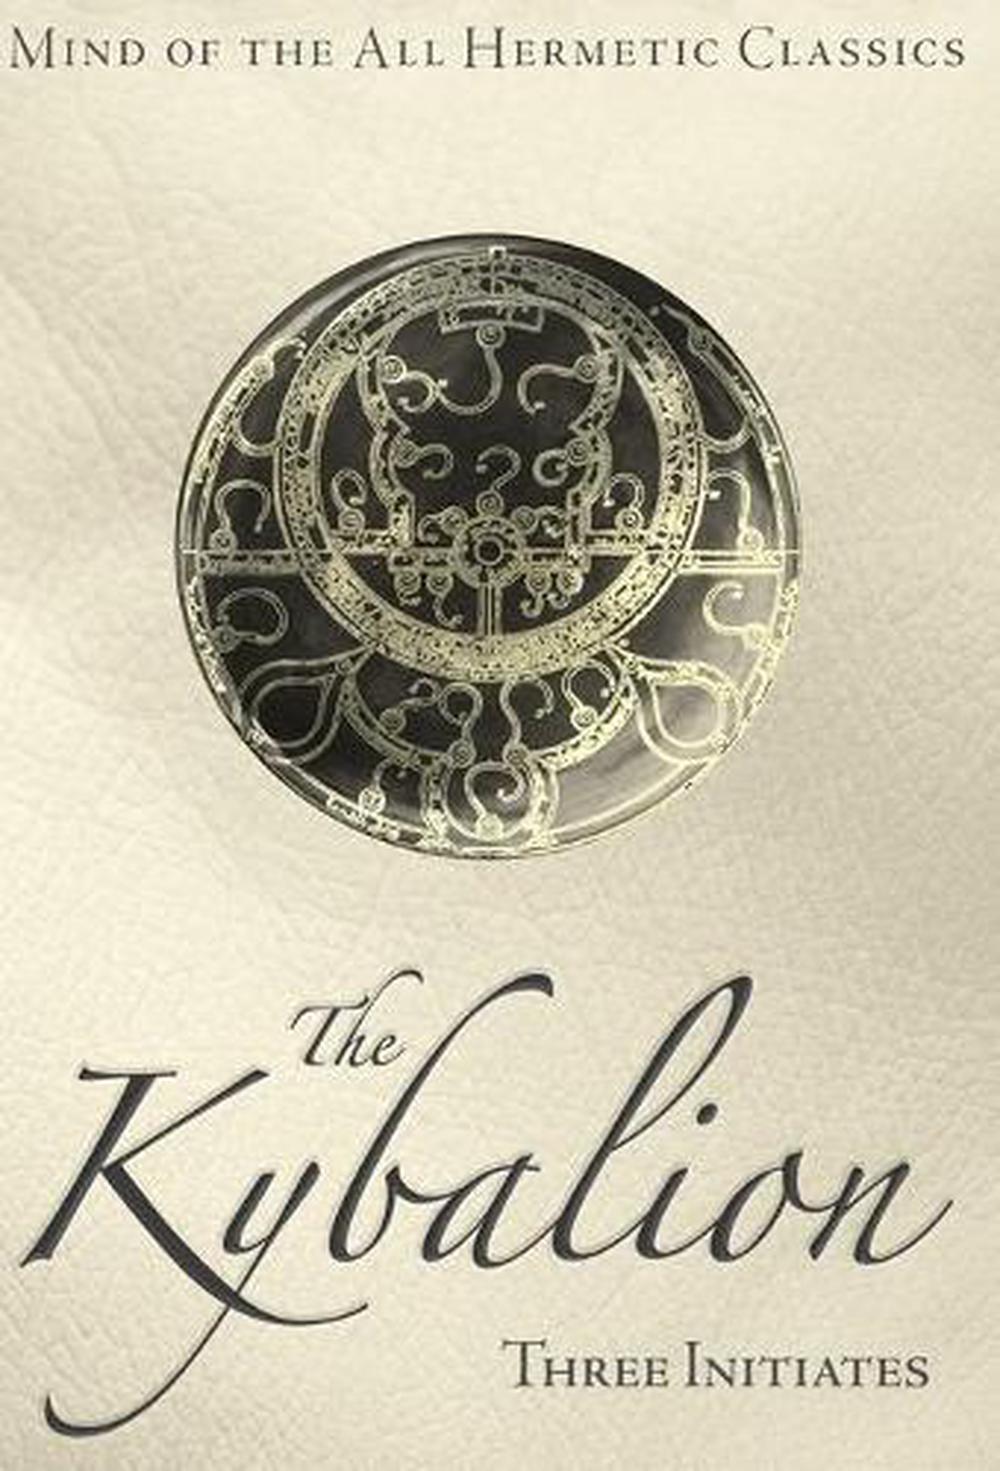 the kybalion book